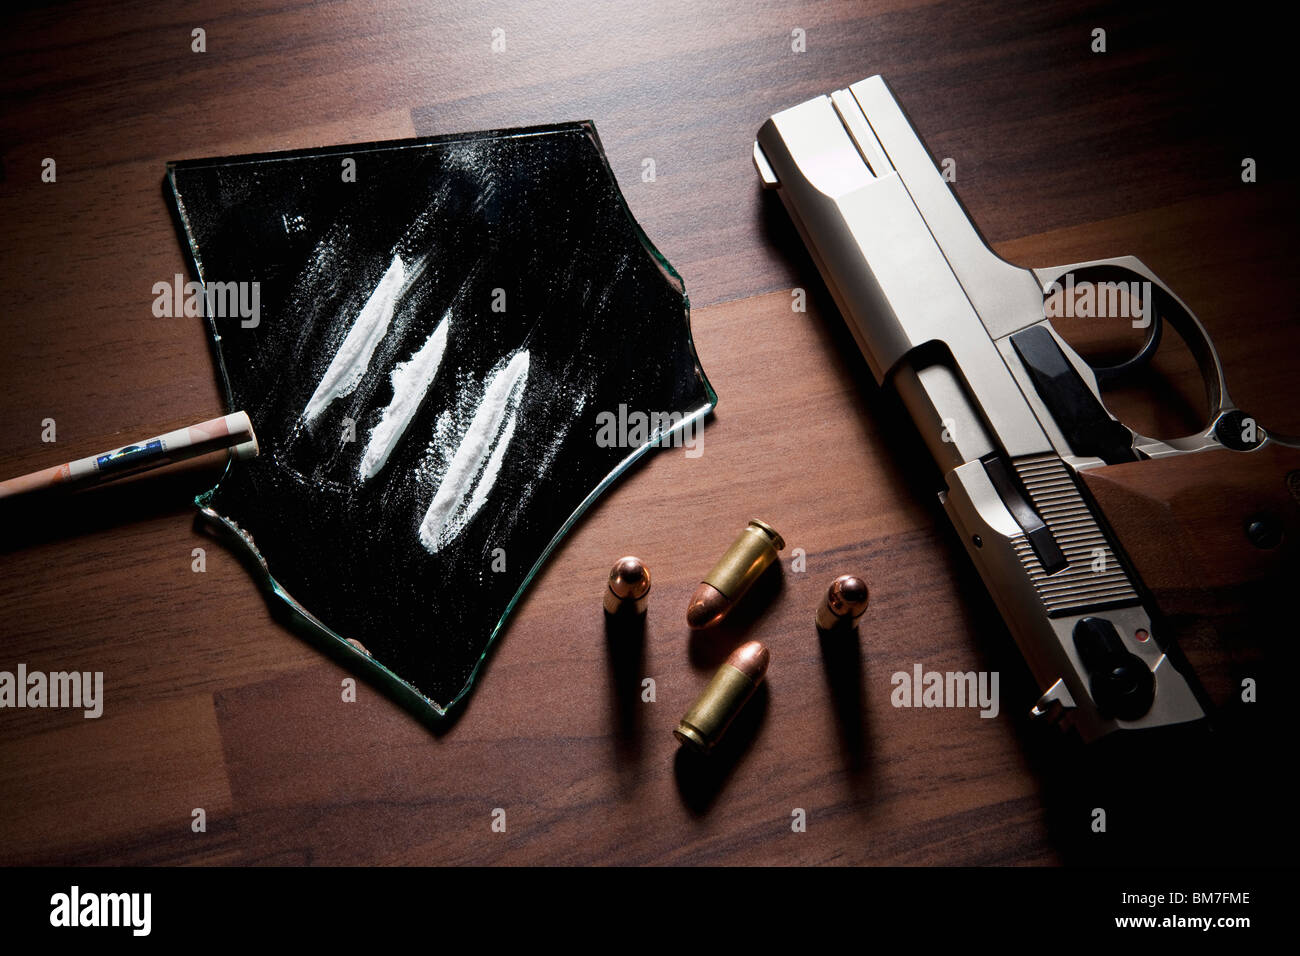 Still Life Of A Handgun, Bullets And Lines Of Cocaine Stock Photo